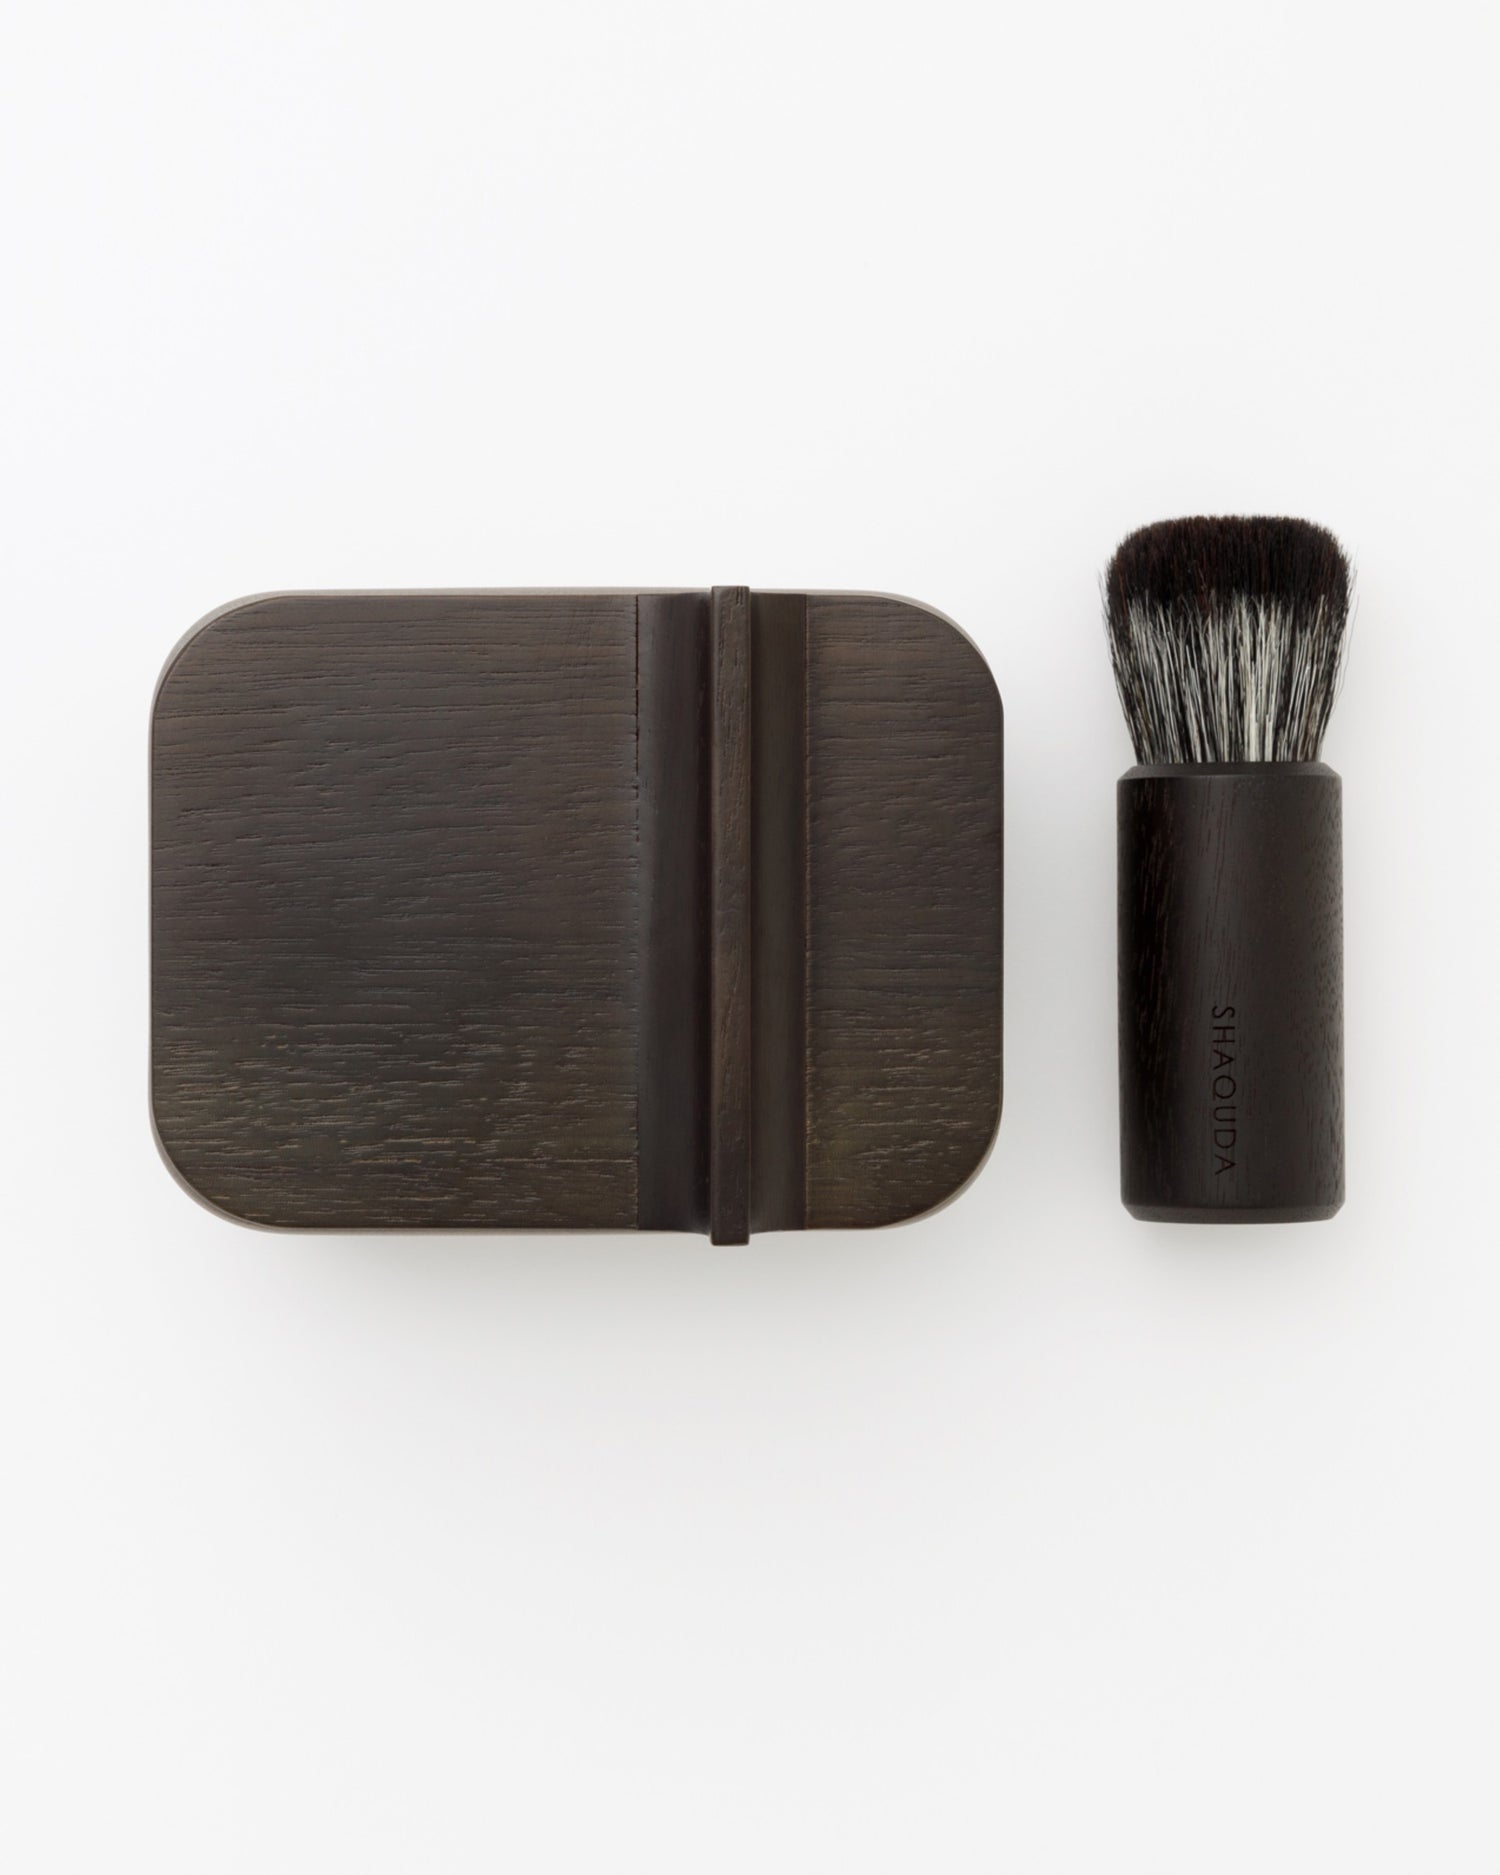  Image of hard Jiva face cleansing and shaving series with porcelain bowl next to  walnut, boar bristle, and goat hair brush by Shaquda against white-gray background. 